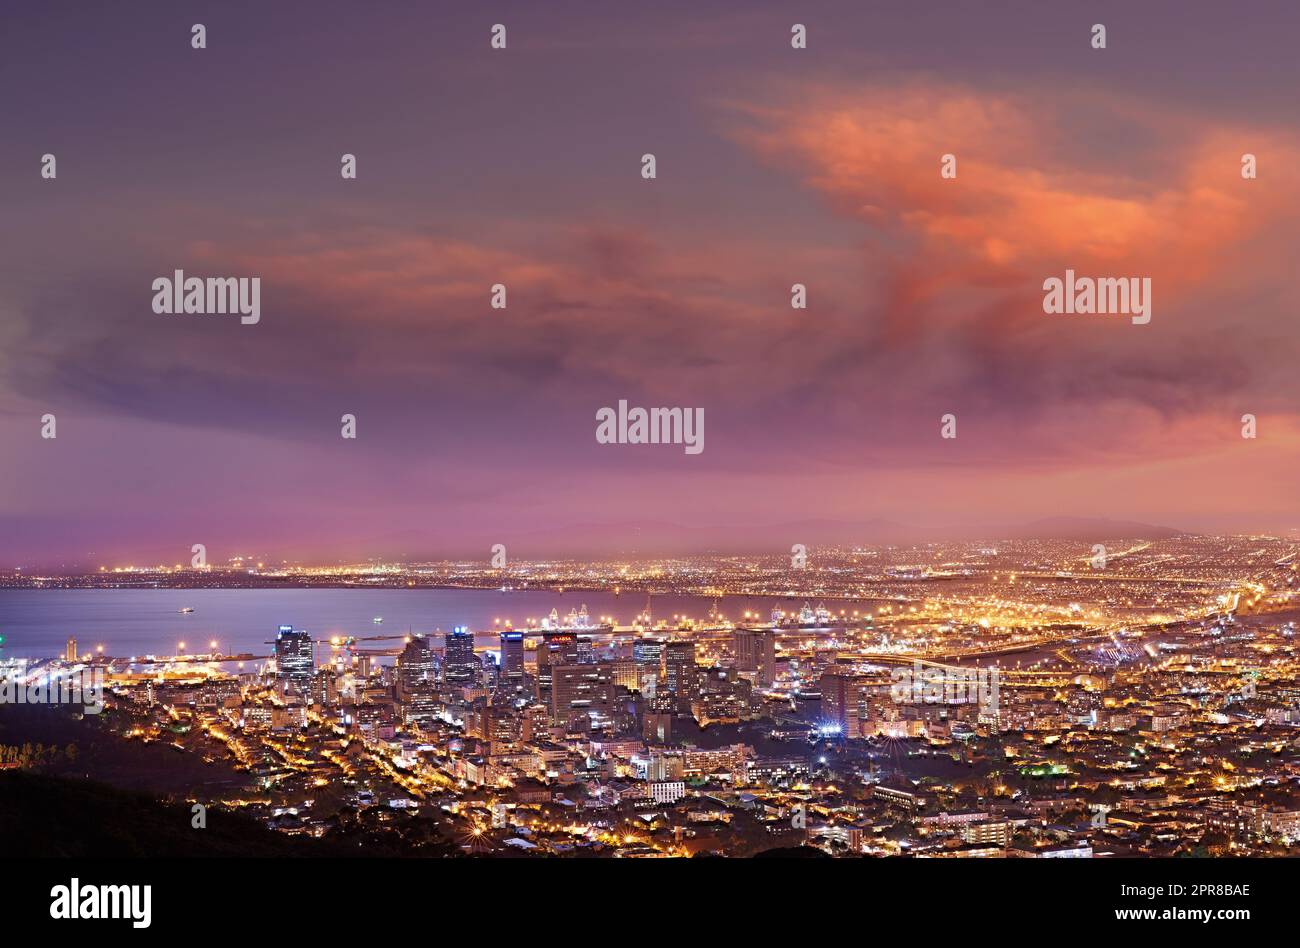 City lights of Cape Town at sunset from above. Dreamy panoramic coastal urban landscape at night. Cityscape near a harbor on purple horizon with clouds. High angle view from Signal Hill, South Africa Stock Photo